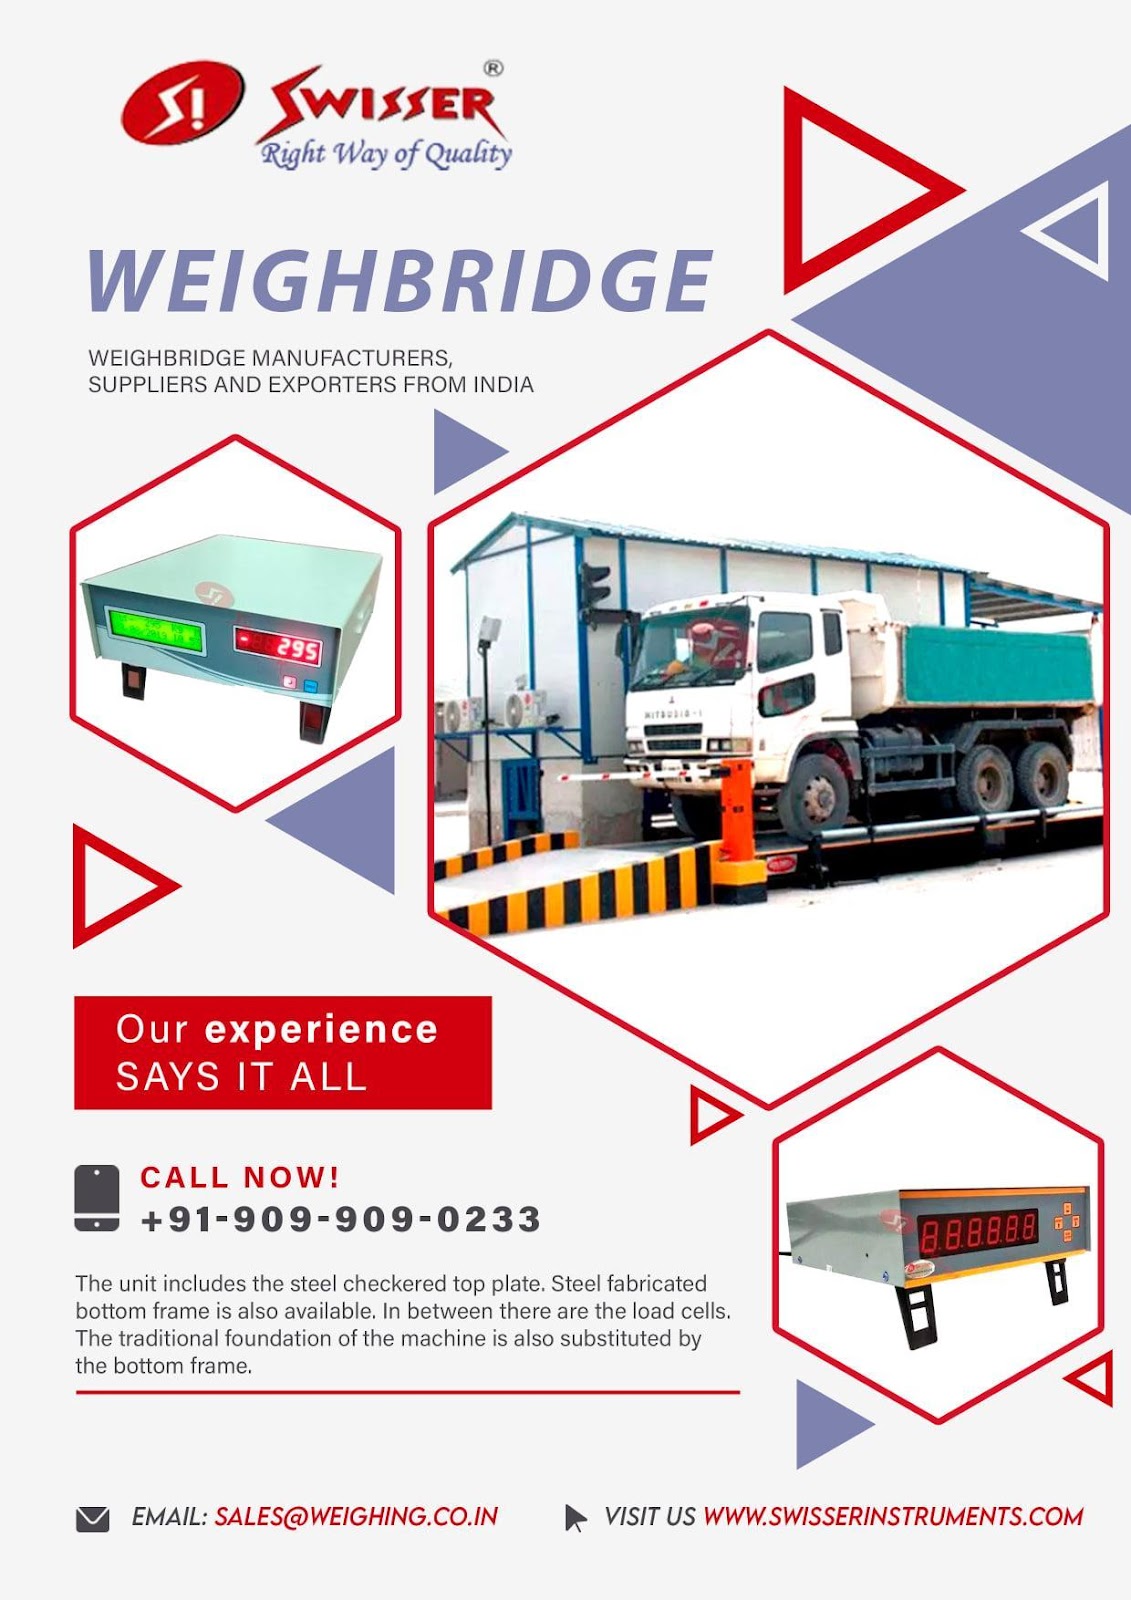 What Are The Significance Of the Weighbridge and Weighing scale Integration?